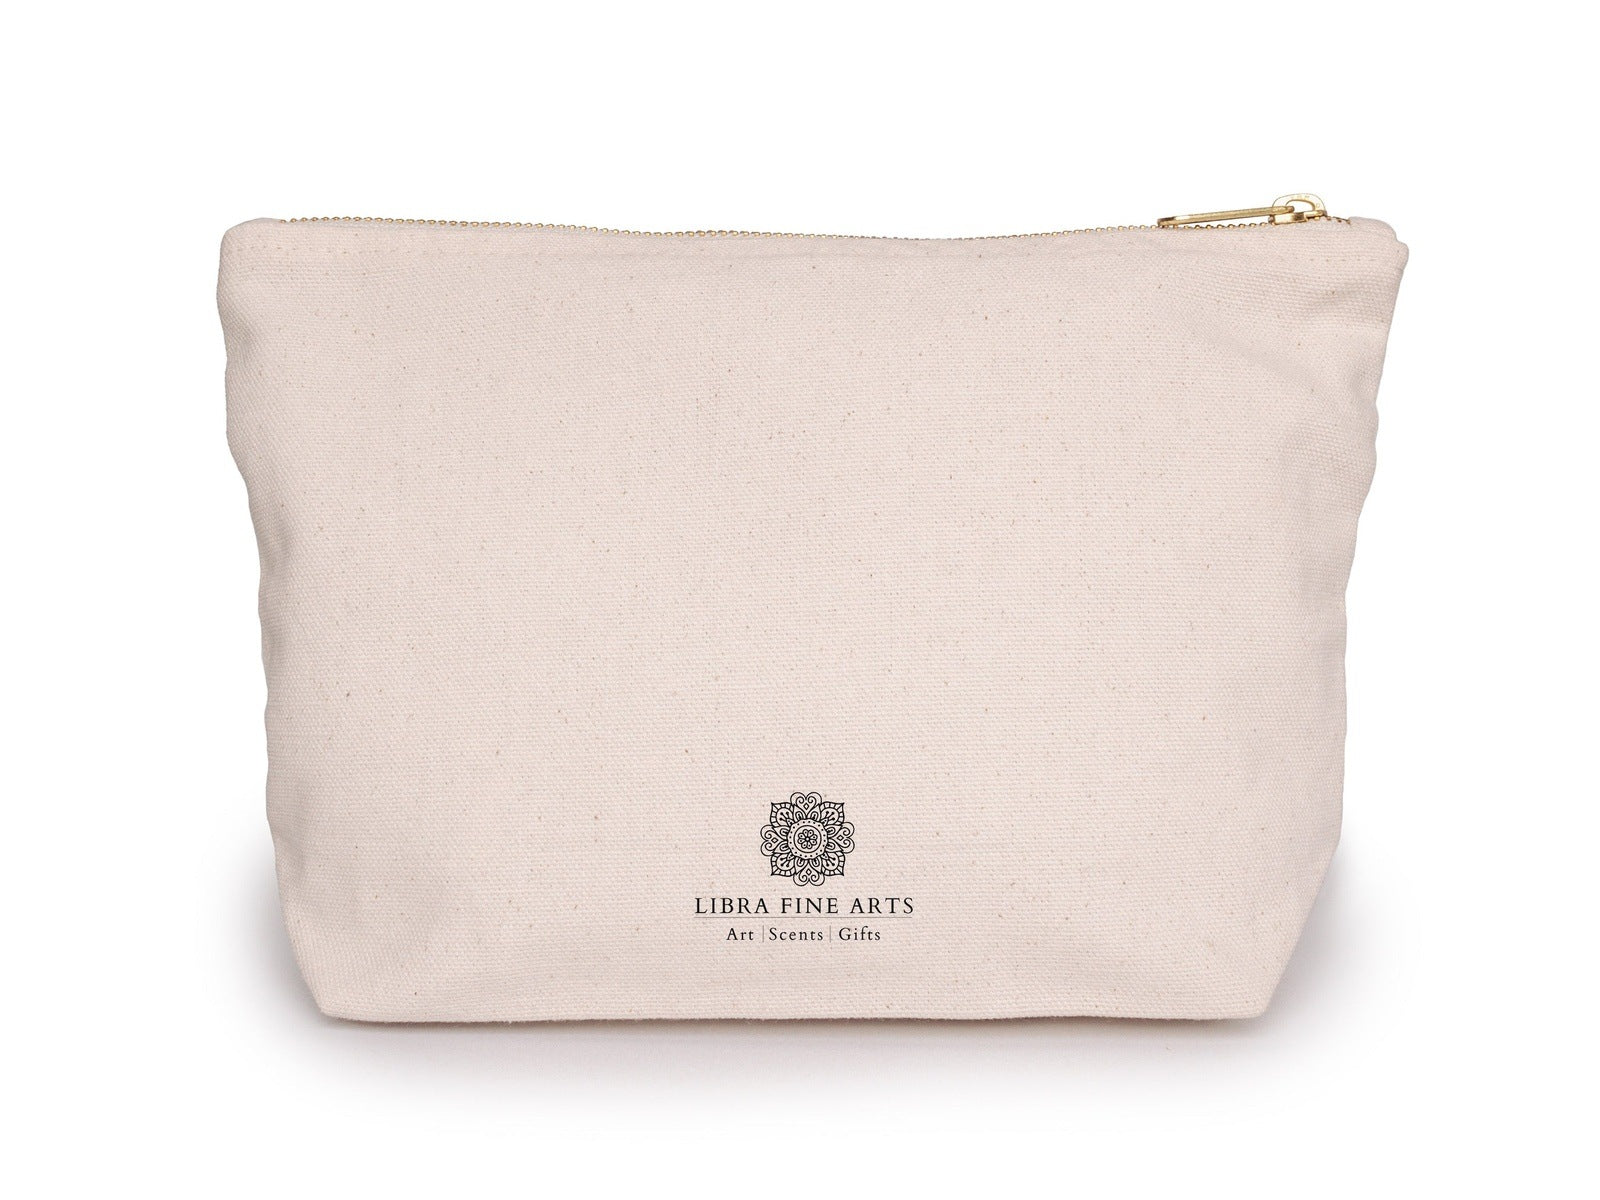 Champagne Glasses Cheers Pouch Bag From Libra Fine Arts